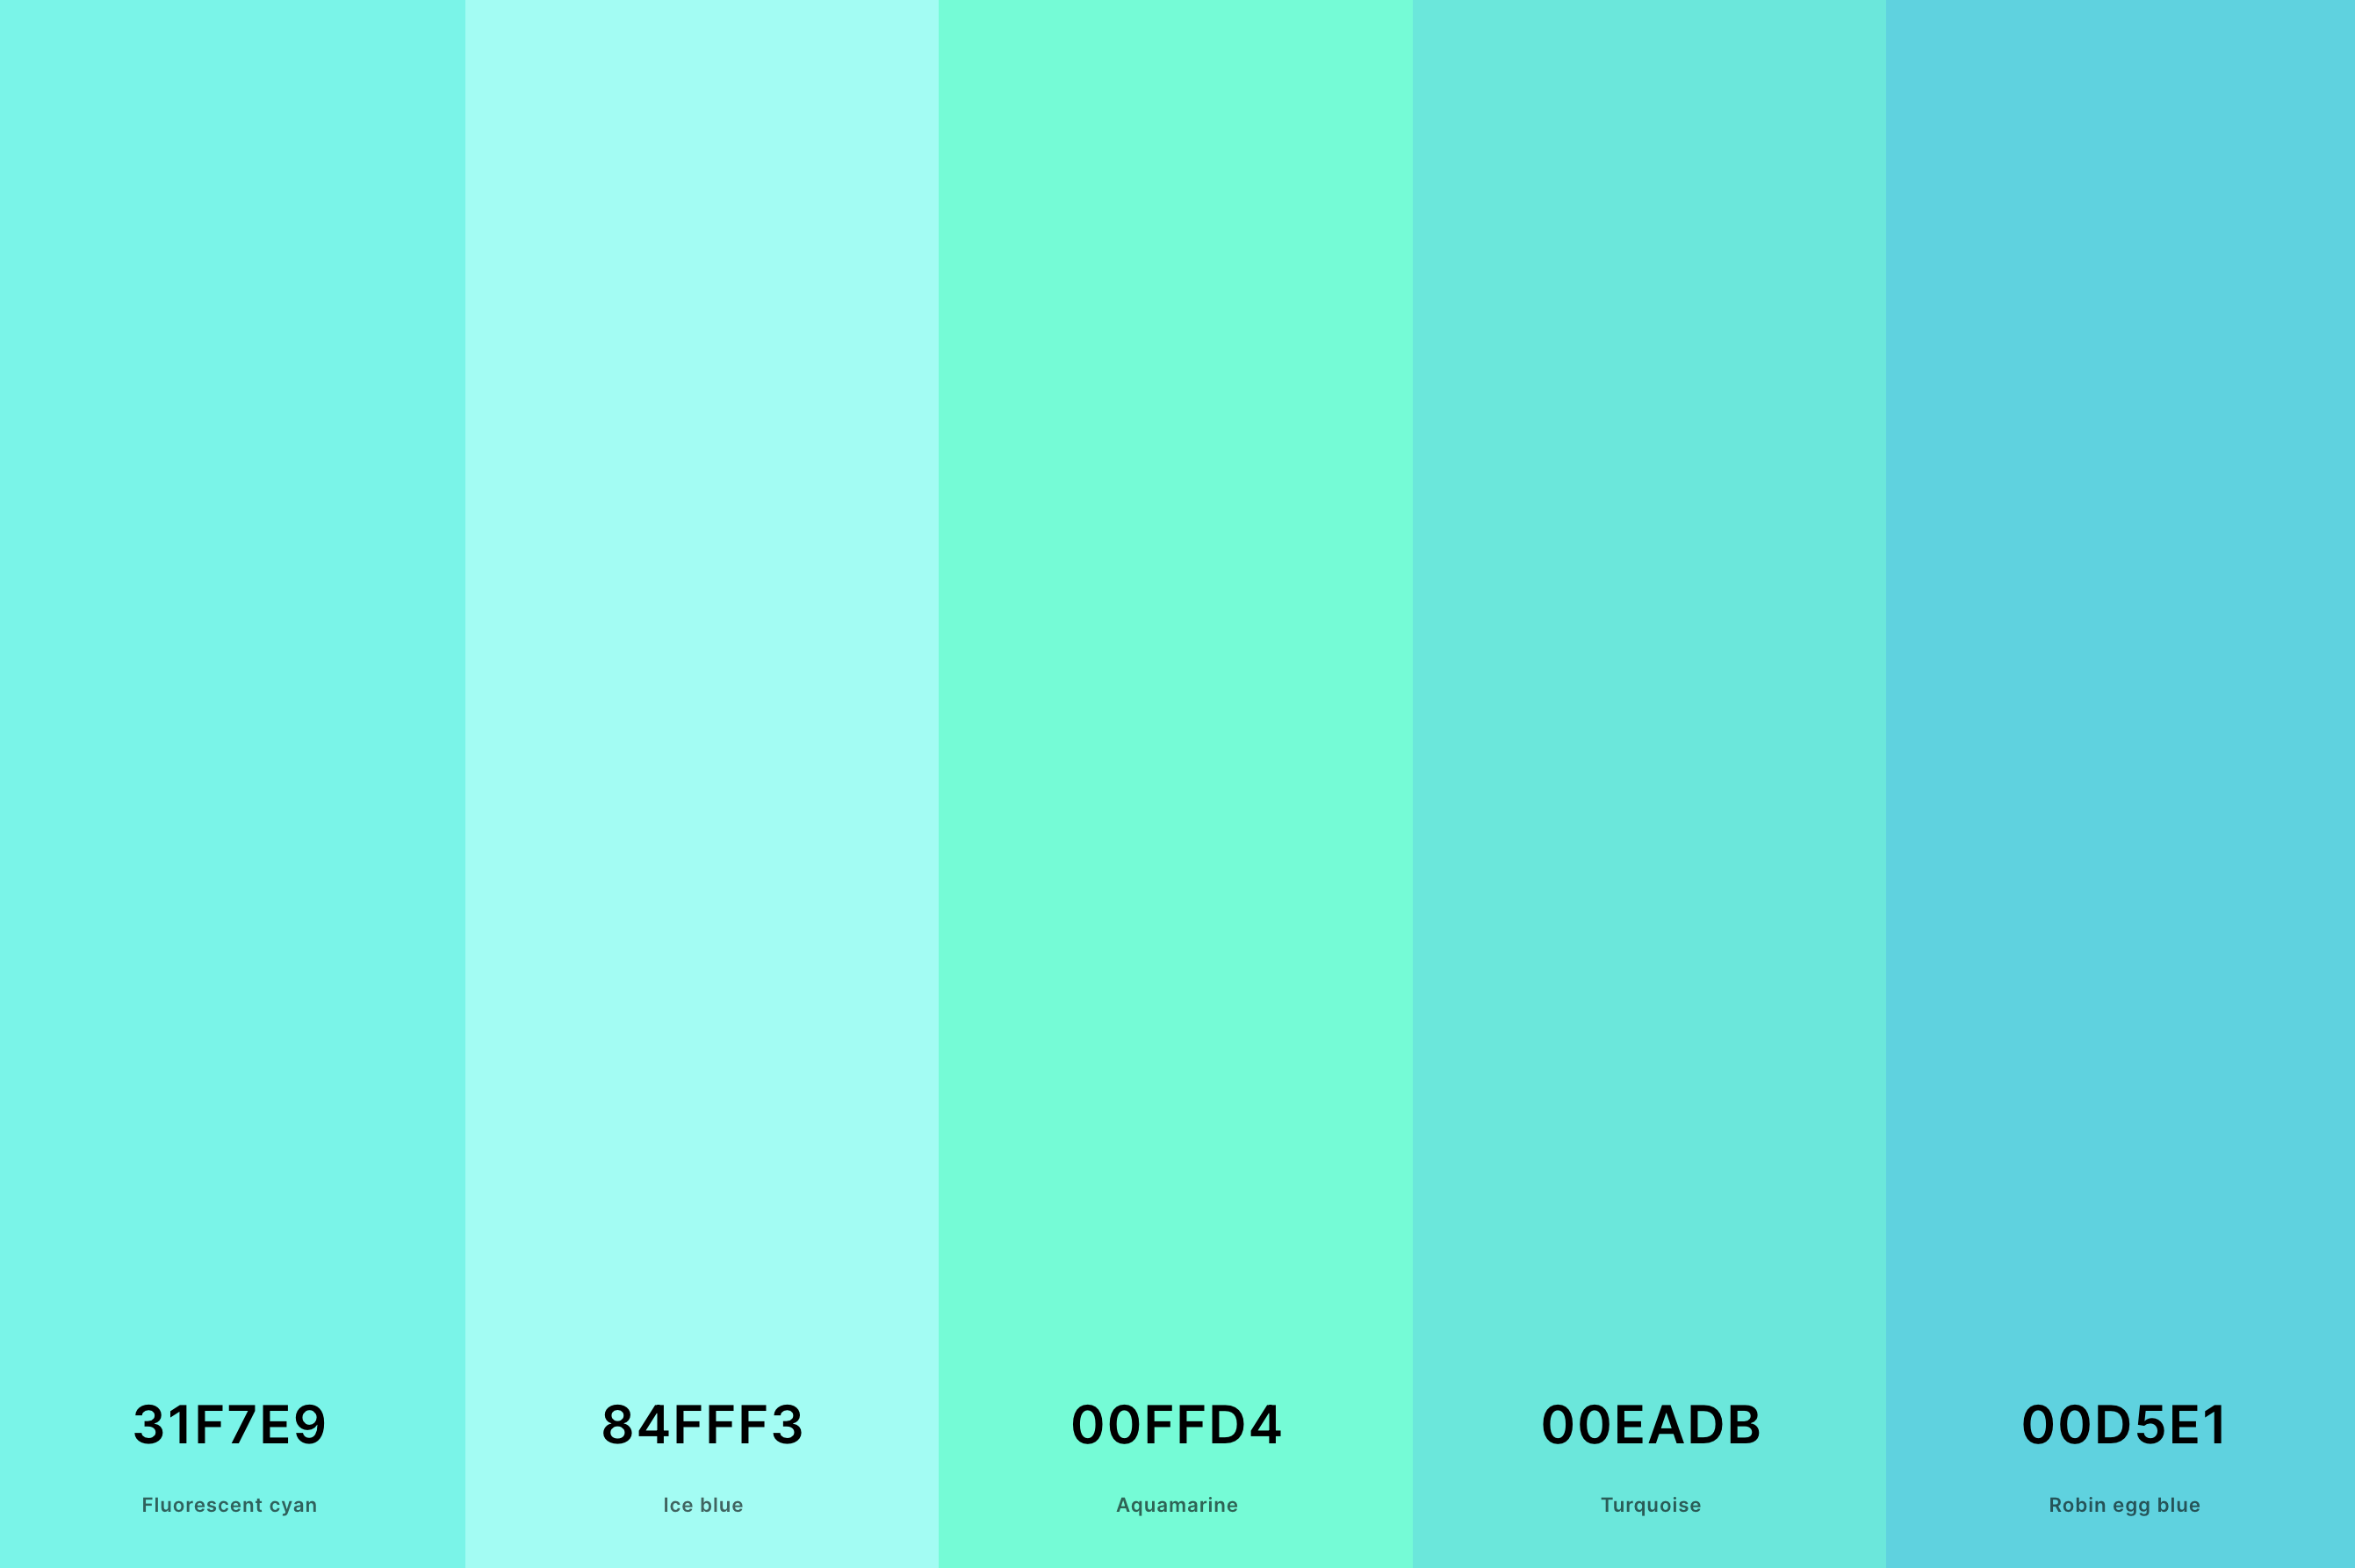 8. Bright Turquoise Color Palette Color Palette with Fluorescent Cyan (Hex #31F7E9) + Ice Blue (Hex #84FFF3) + Aquamarine (Hex #00FFD4) + Turquoise (Hex #00EADB) + Robin Egg Blue (Hex #00D5E1) Color Palette with Hex Codes